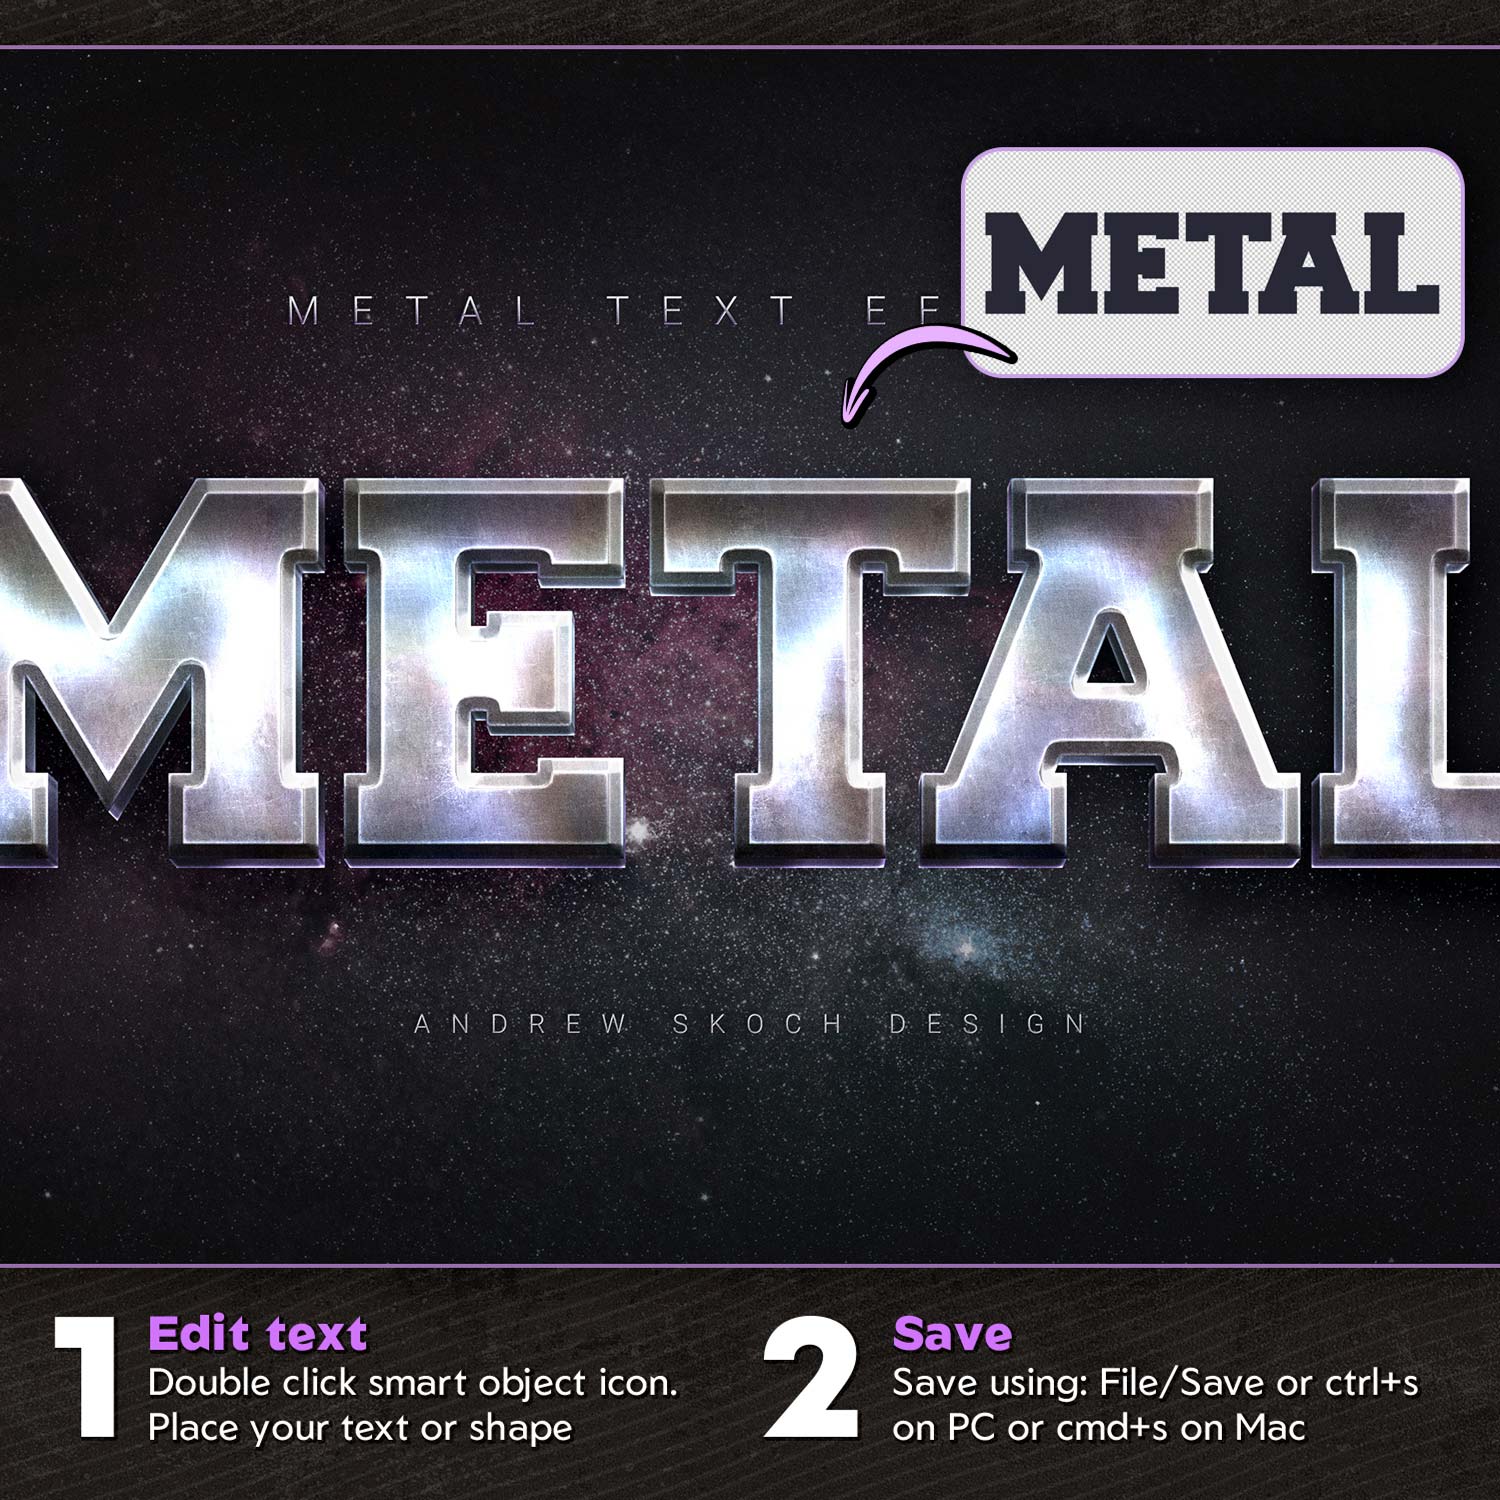 Metal Text Effects preview image.